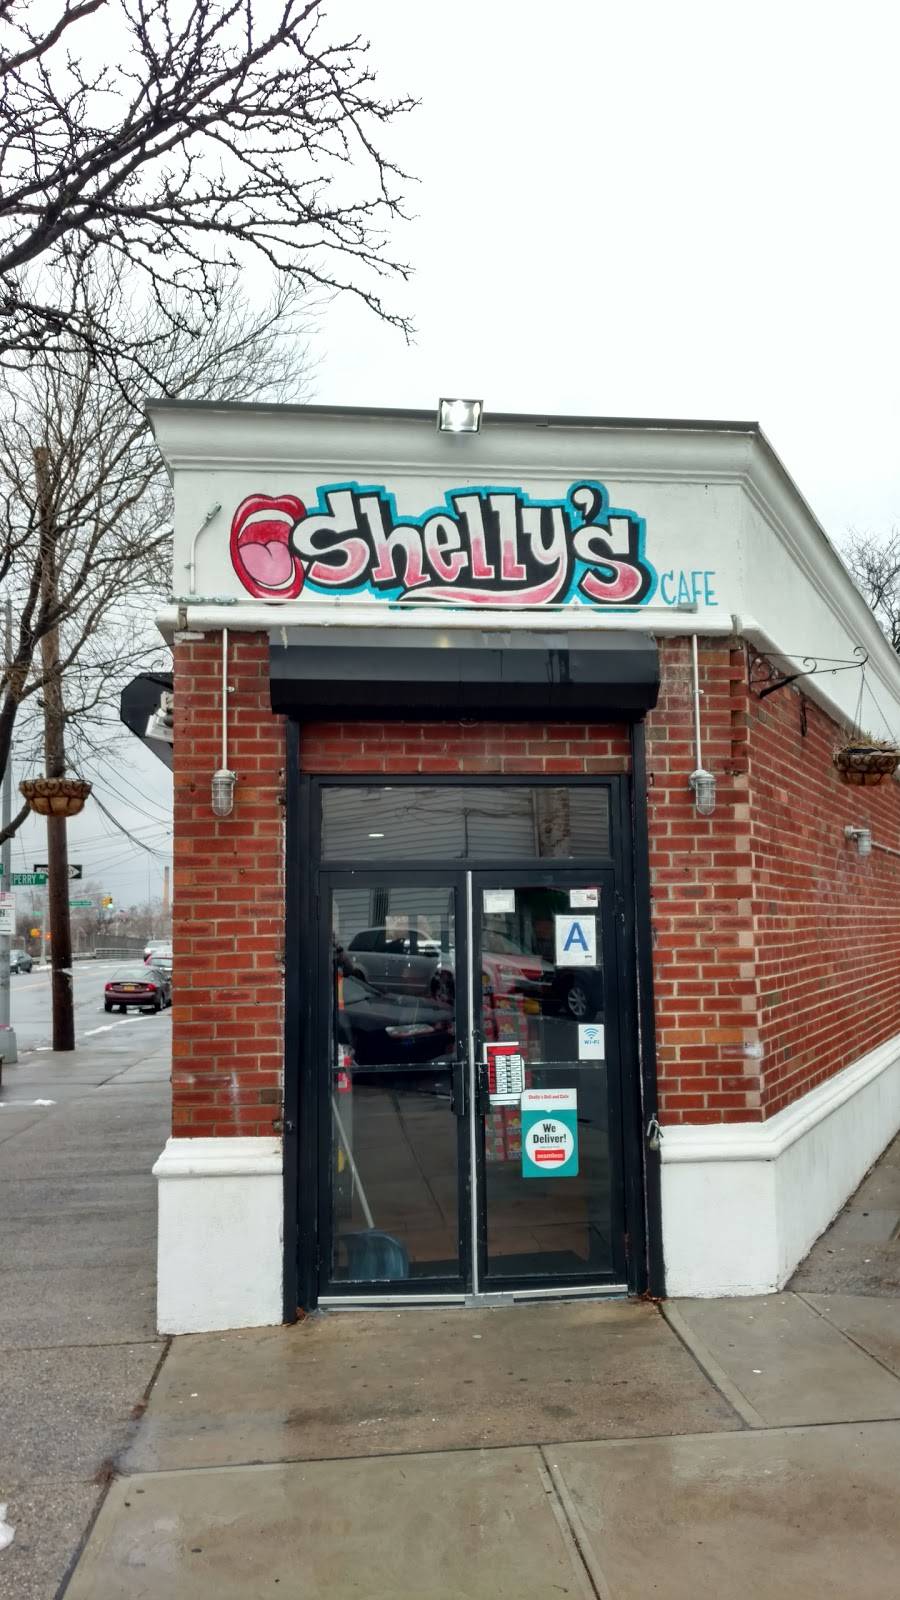 Shellys Deli and Cafe | restaurant | 5634 66th St, Maspeth, NY 11378, USA | 7184240429 OR +1 718-424-0429